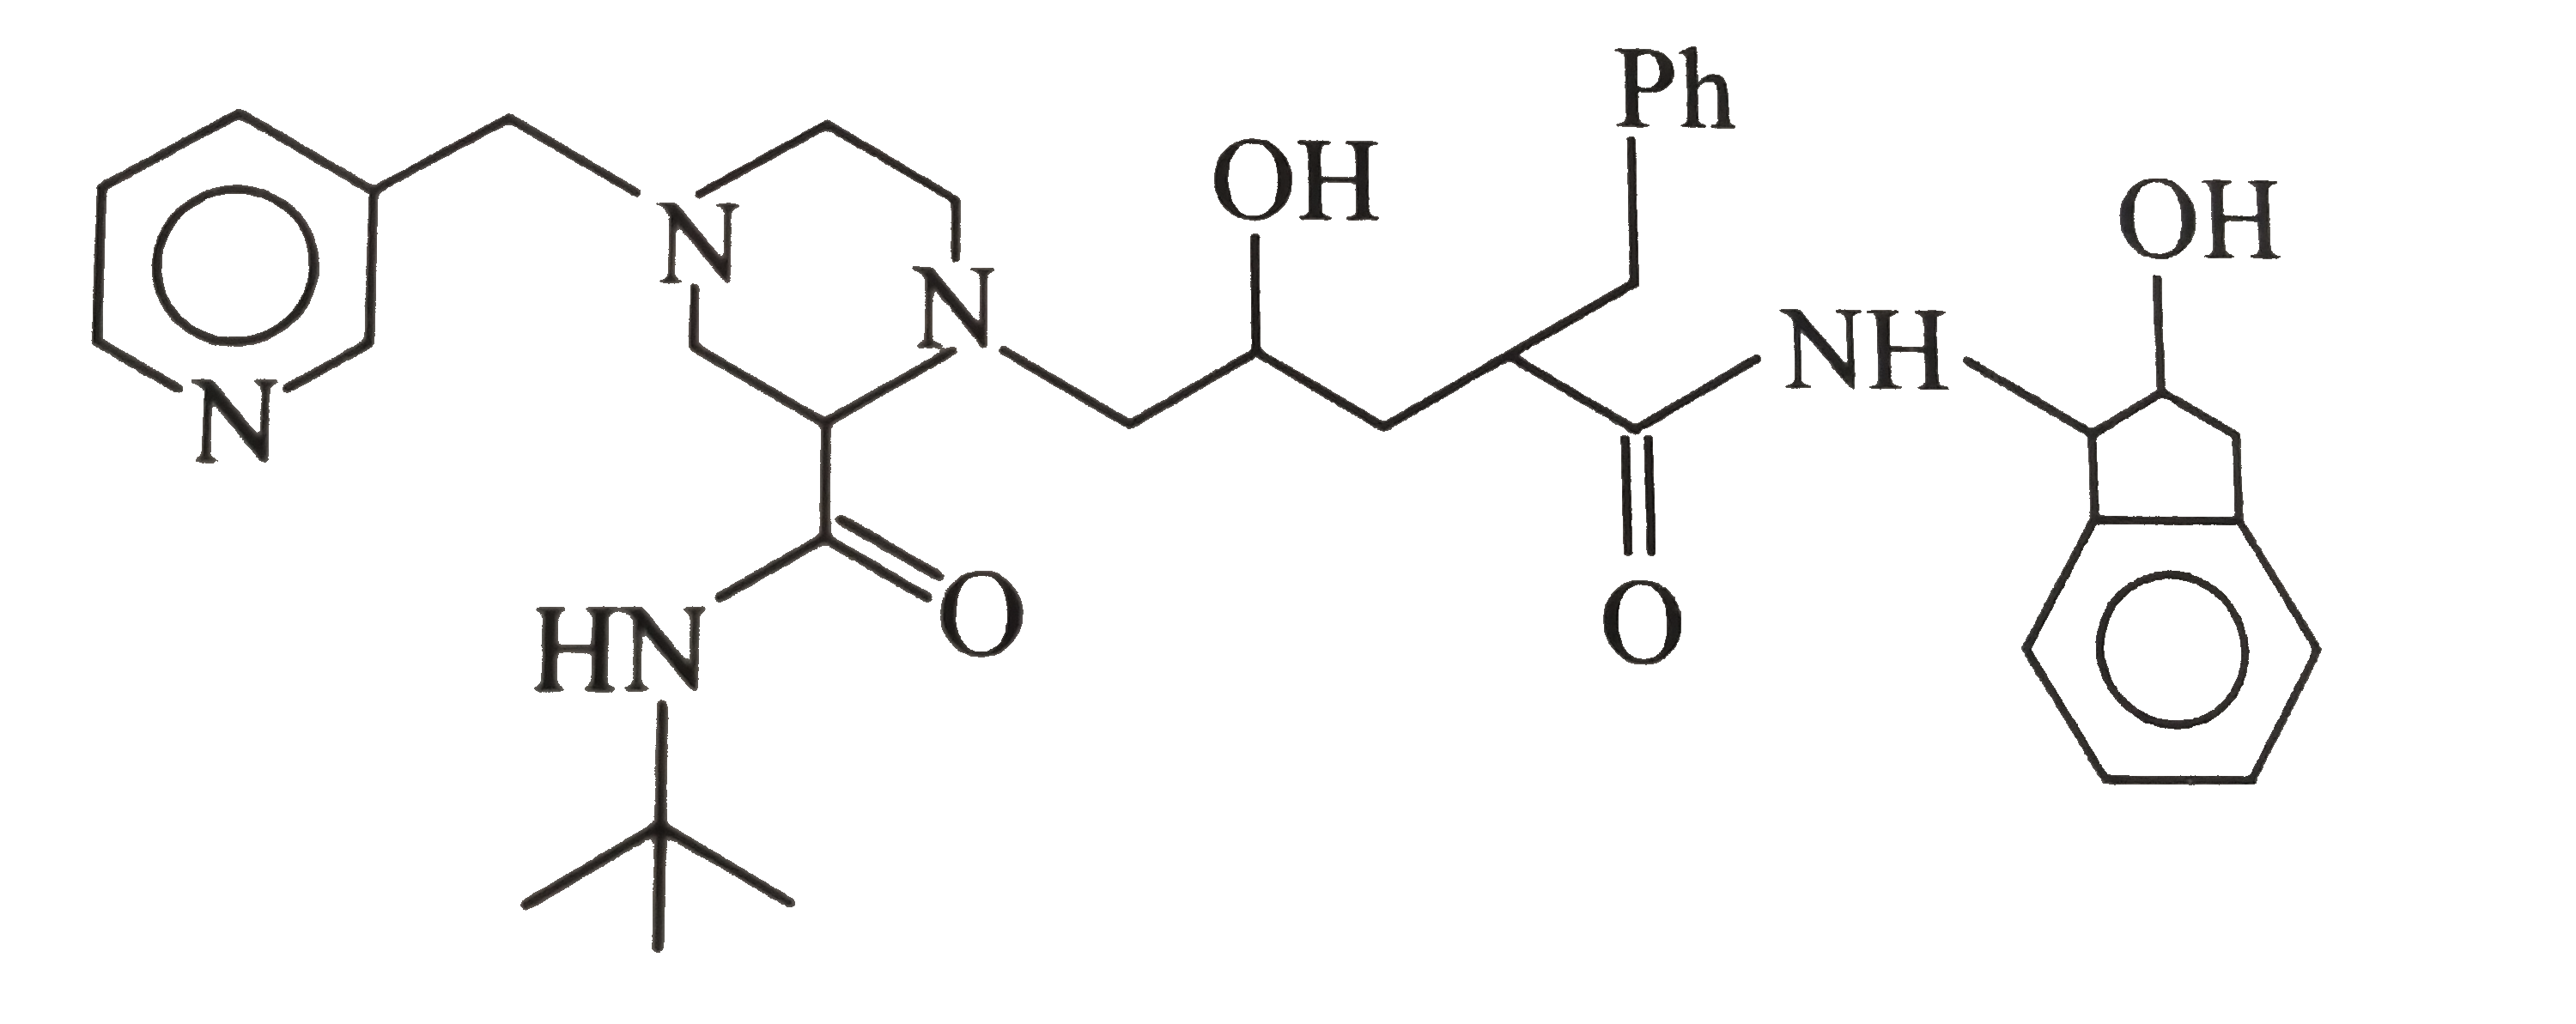 Crixivan, a drug produced by Merck and Co., is widely used in the fight at against AIDS (acquied immune dificiency syndrome). The sturcture of cirxivan is given below:       How many 2^(@) alcohol groups are present in the above compound?